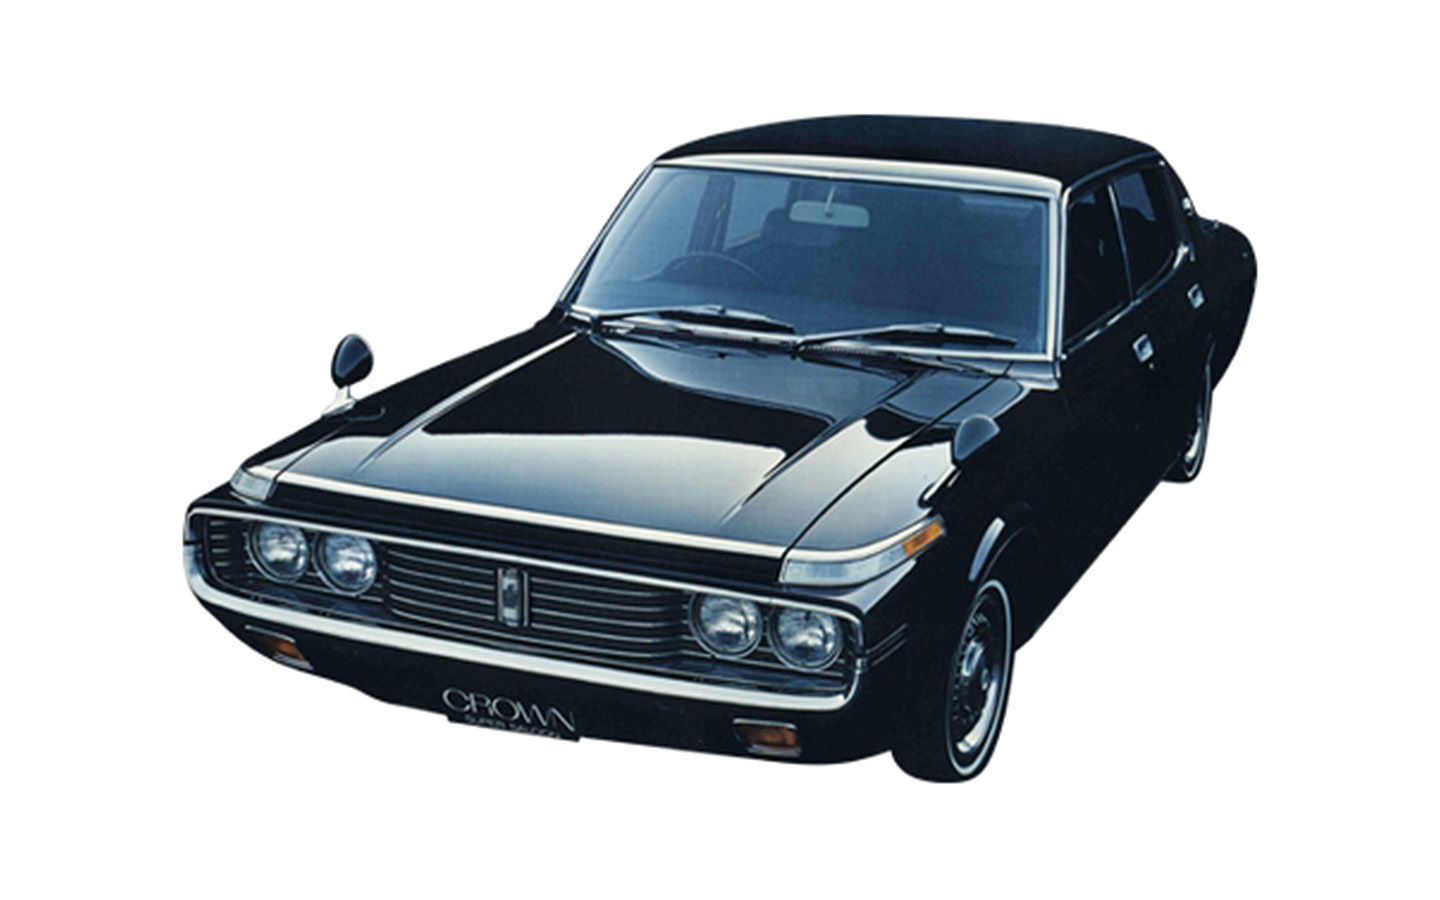 fourth generation Toyota Crown 1971 was marketed under its new name